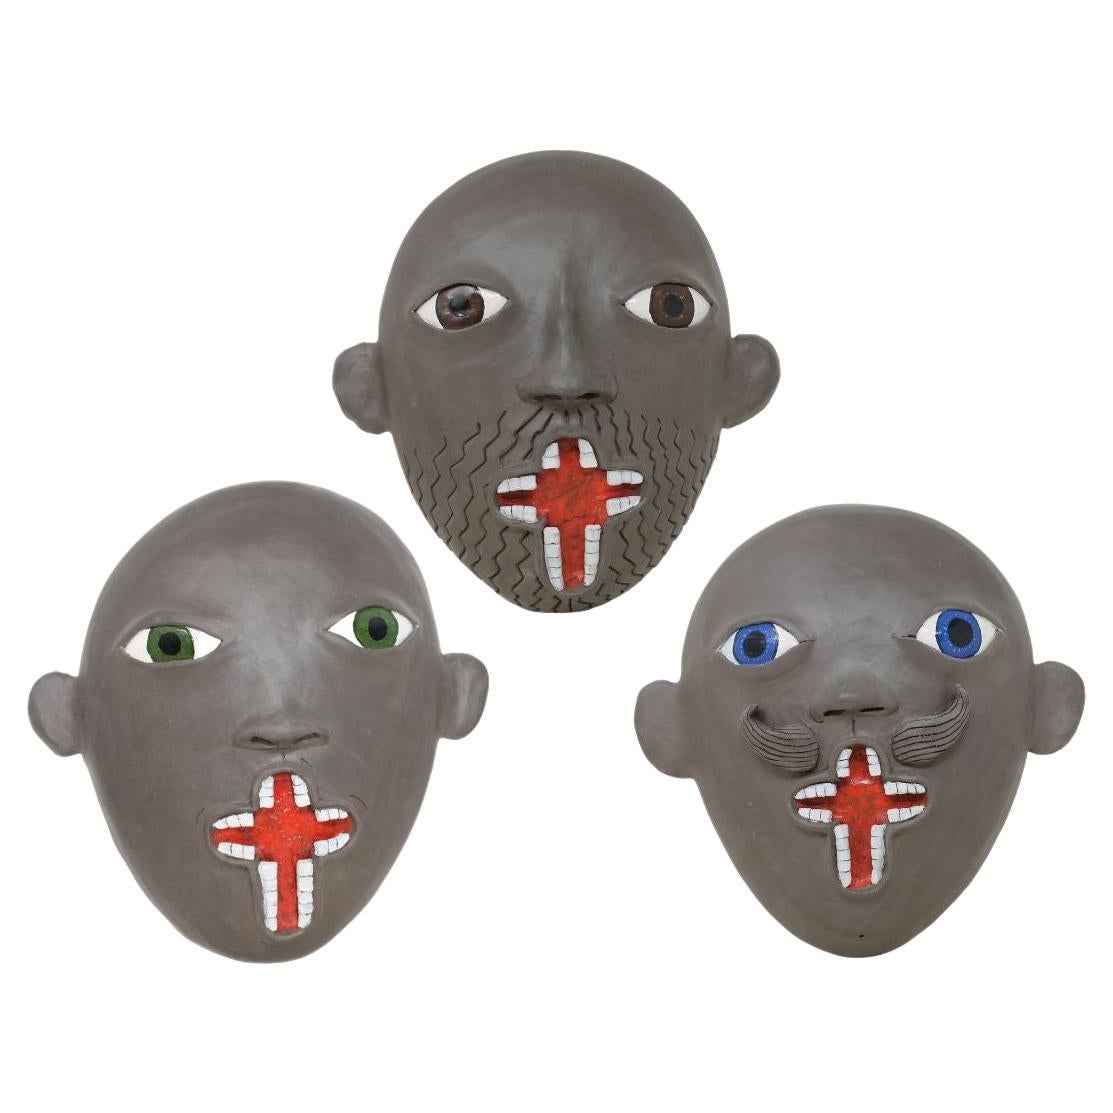 Freaklab Trio Masks Made Entirely by Hand in Ceramic For Sale